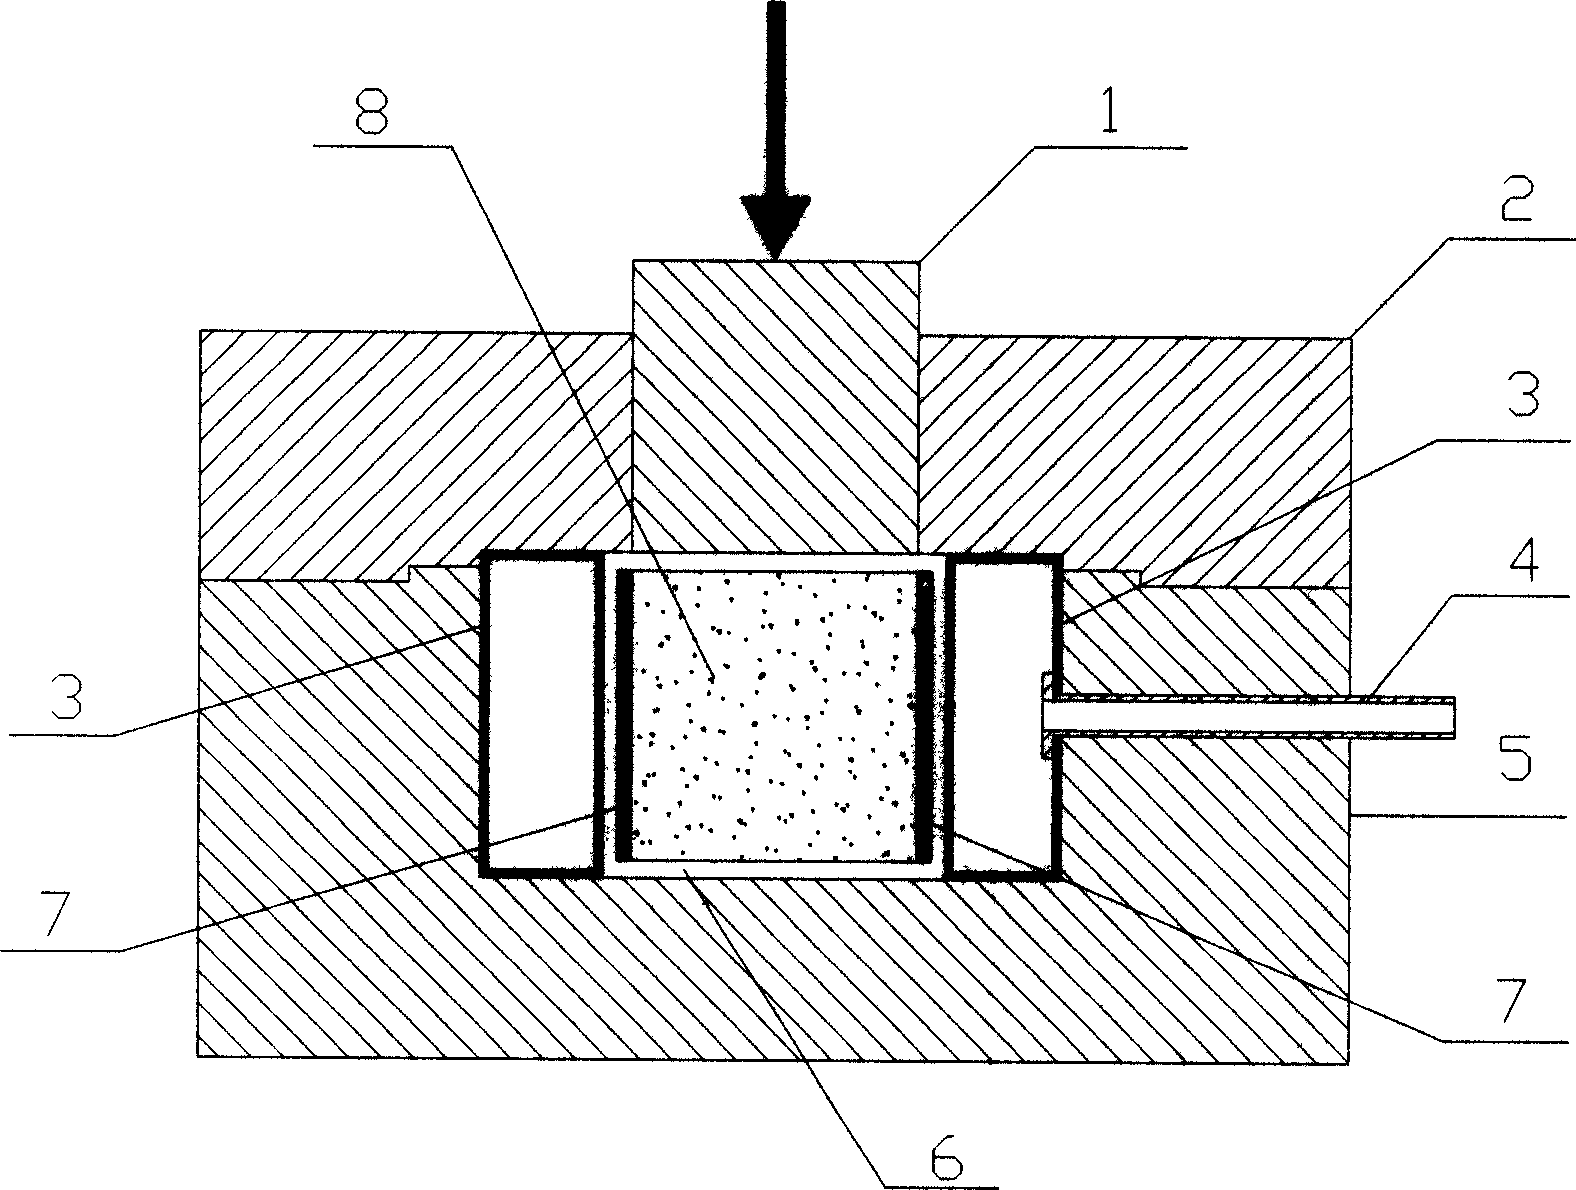 Rock core gripper for simulating formation multiple stress field coupling action